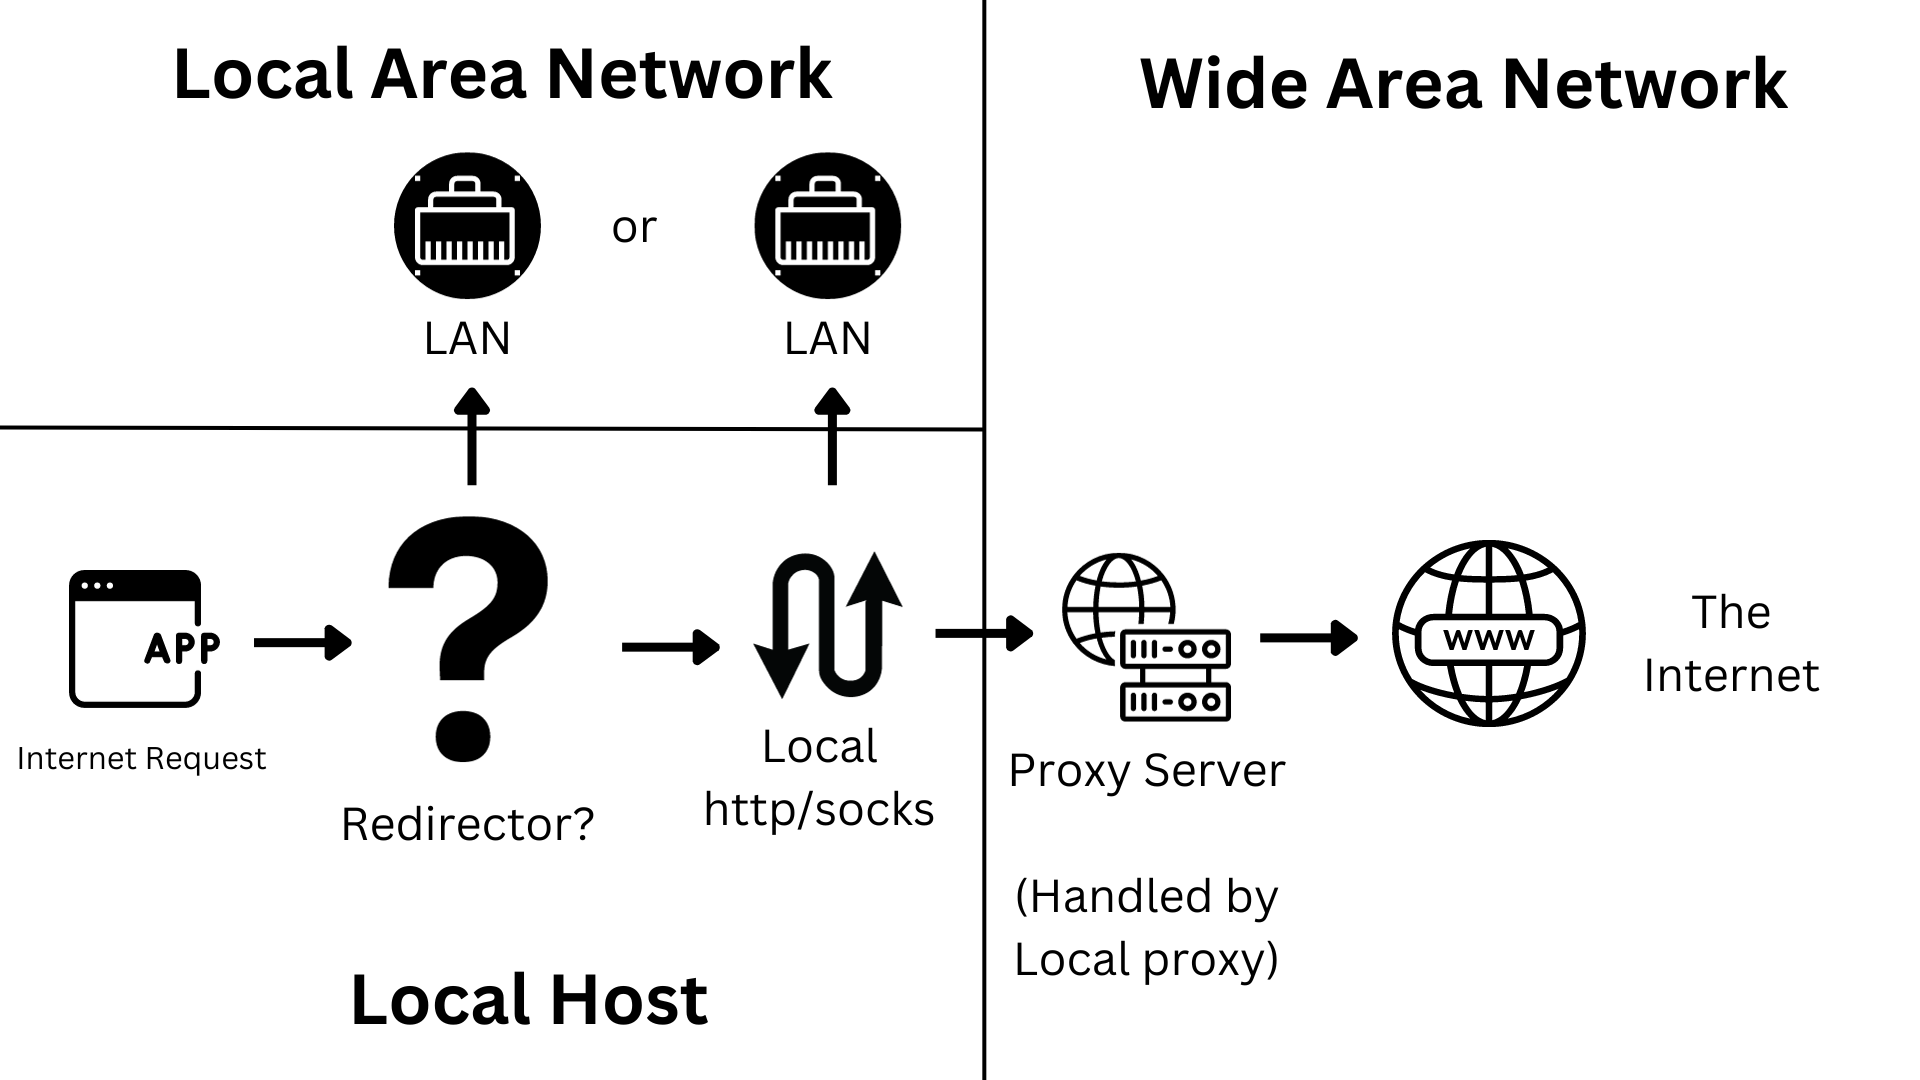 Network Topology